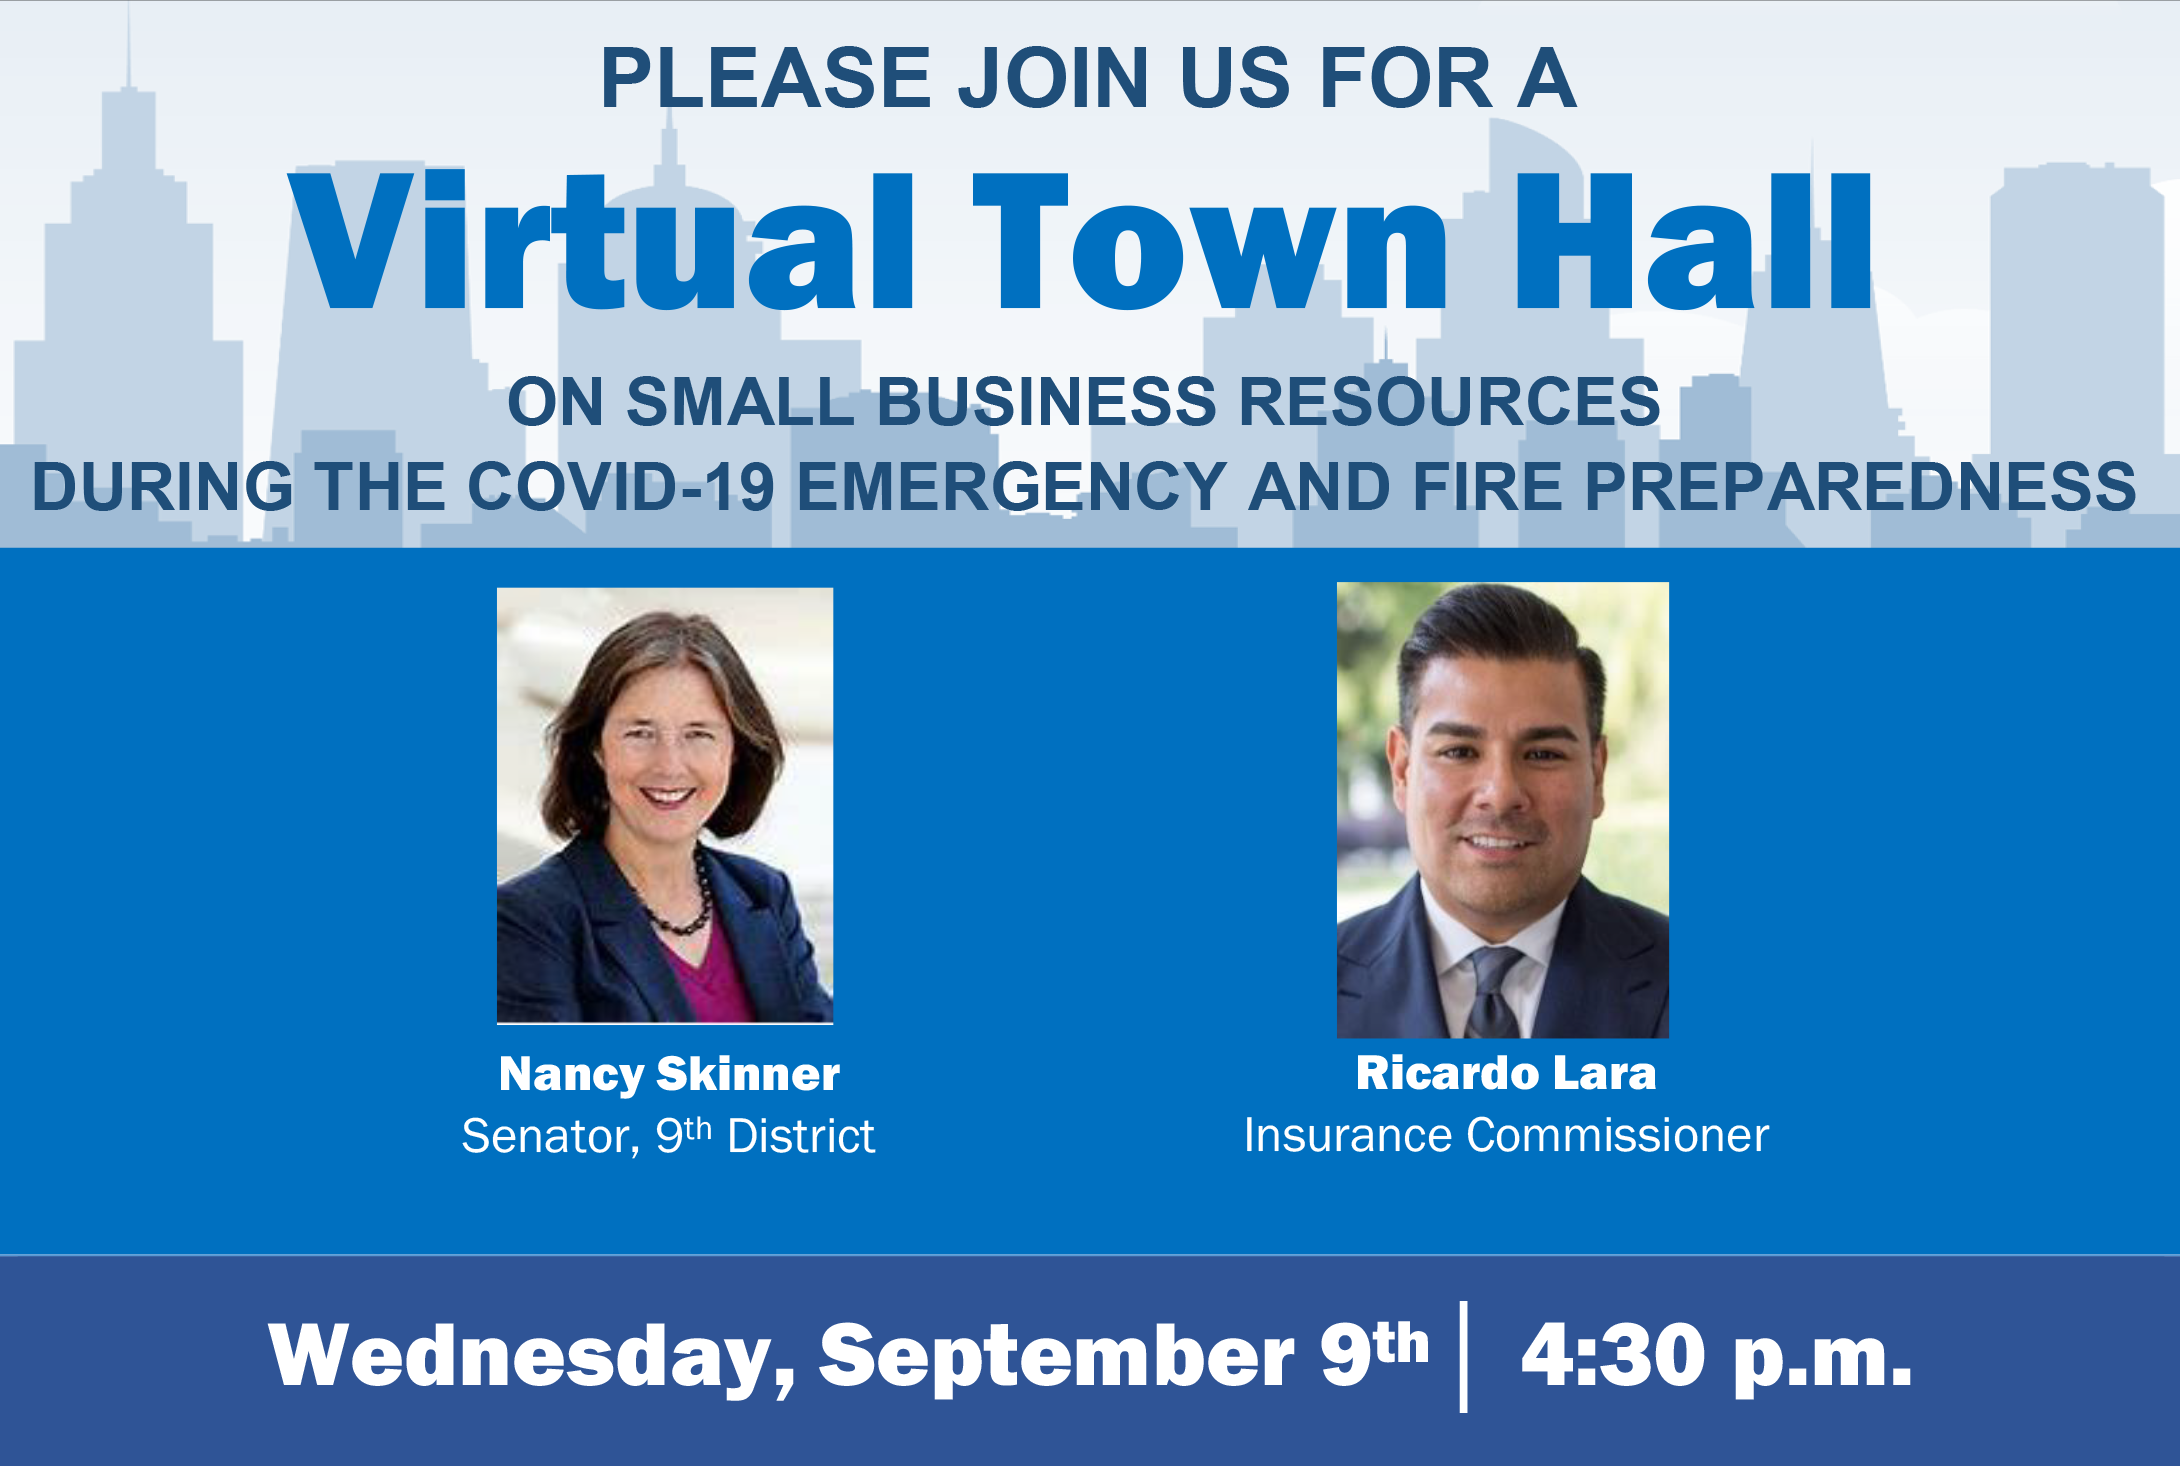 PLEASE JOIN Senator Nancy Skinner Senator and Insurance Commissioner Ricardo Lara at a Virtual Town Hall ON SMALL BUSINESS RESOURCES   DURING THE COVID-19 EMERGENCY AND FIRE PREPAREDNESS